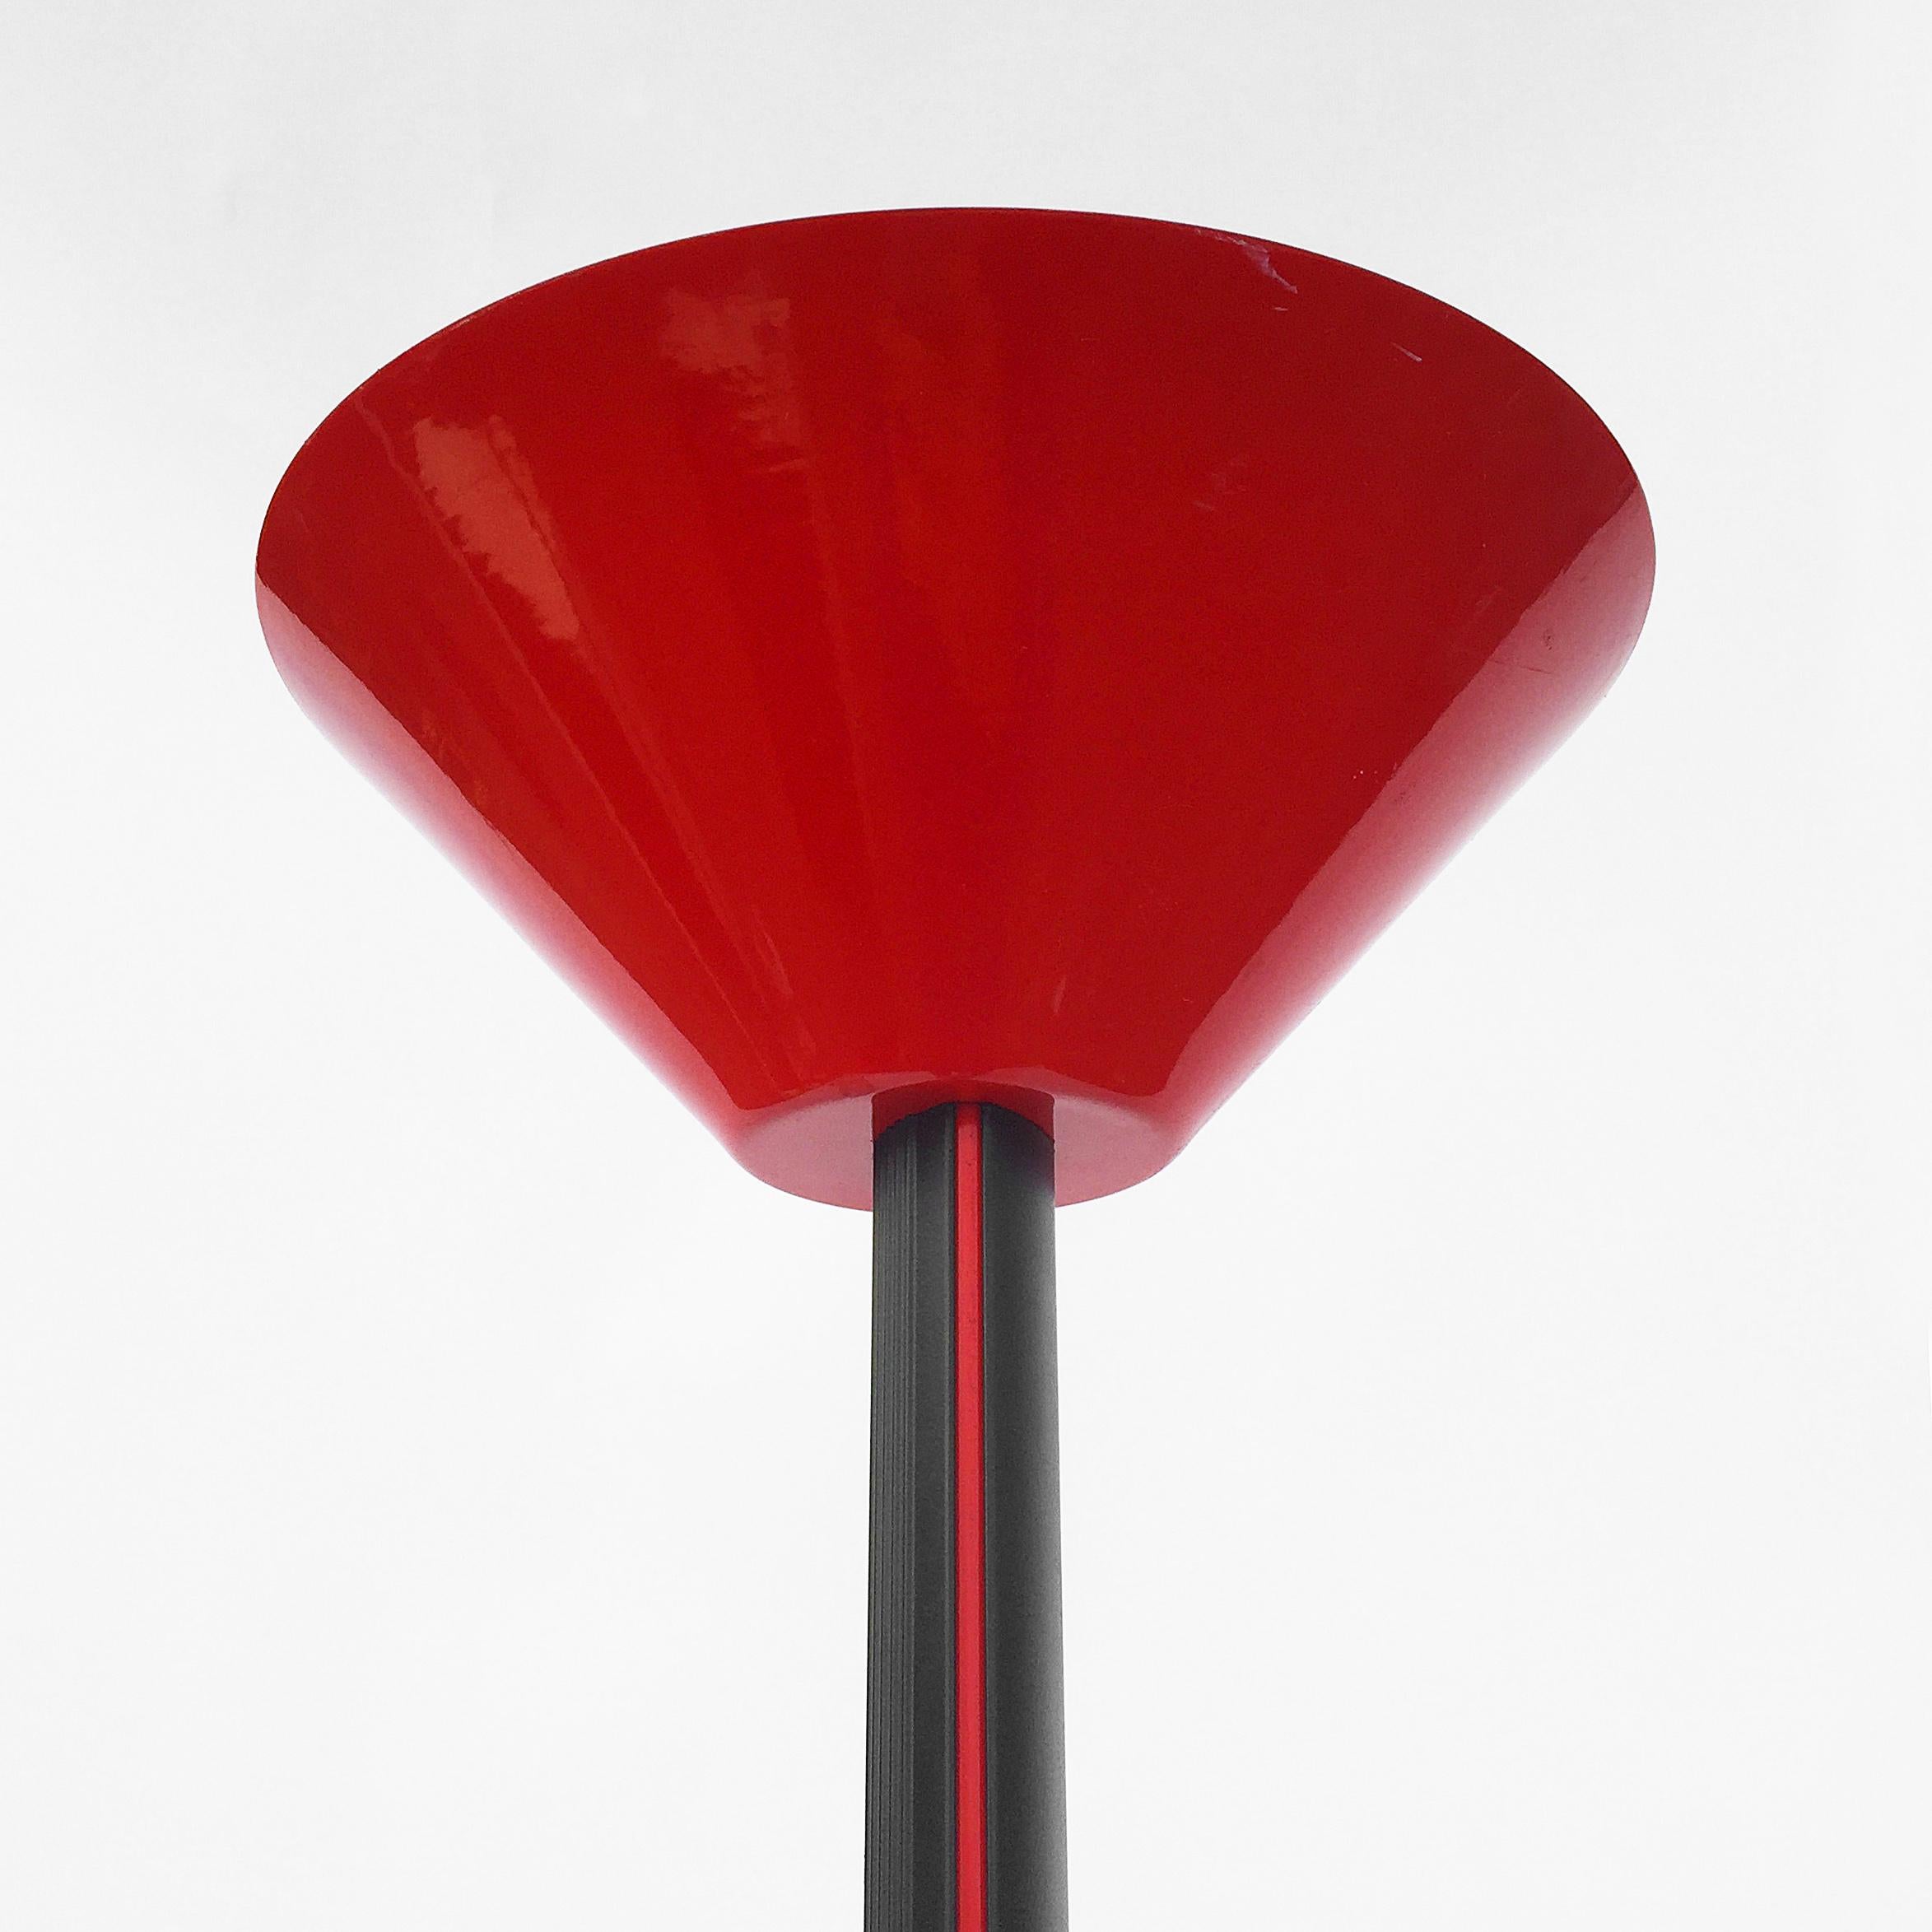 Late 20th Century Memphis Inspired Uplighters 1980s Floor Lamp Red Black Postmodern Sottsass Style For Sale